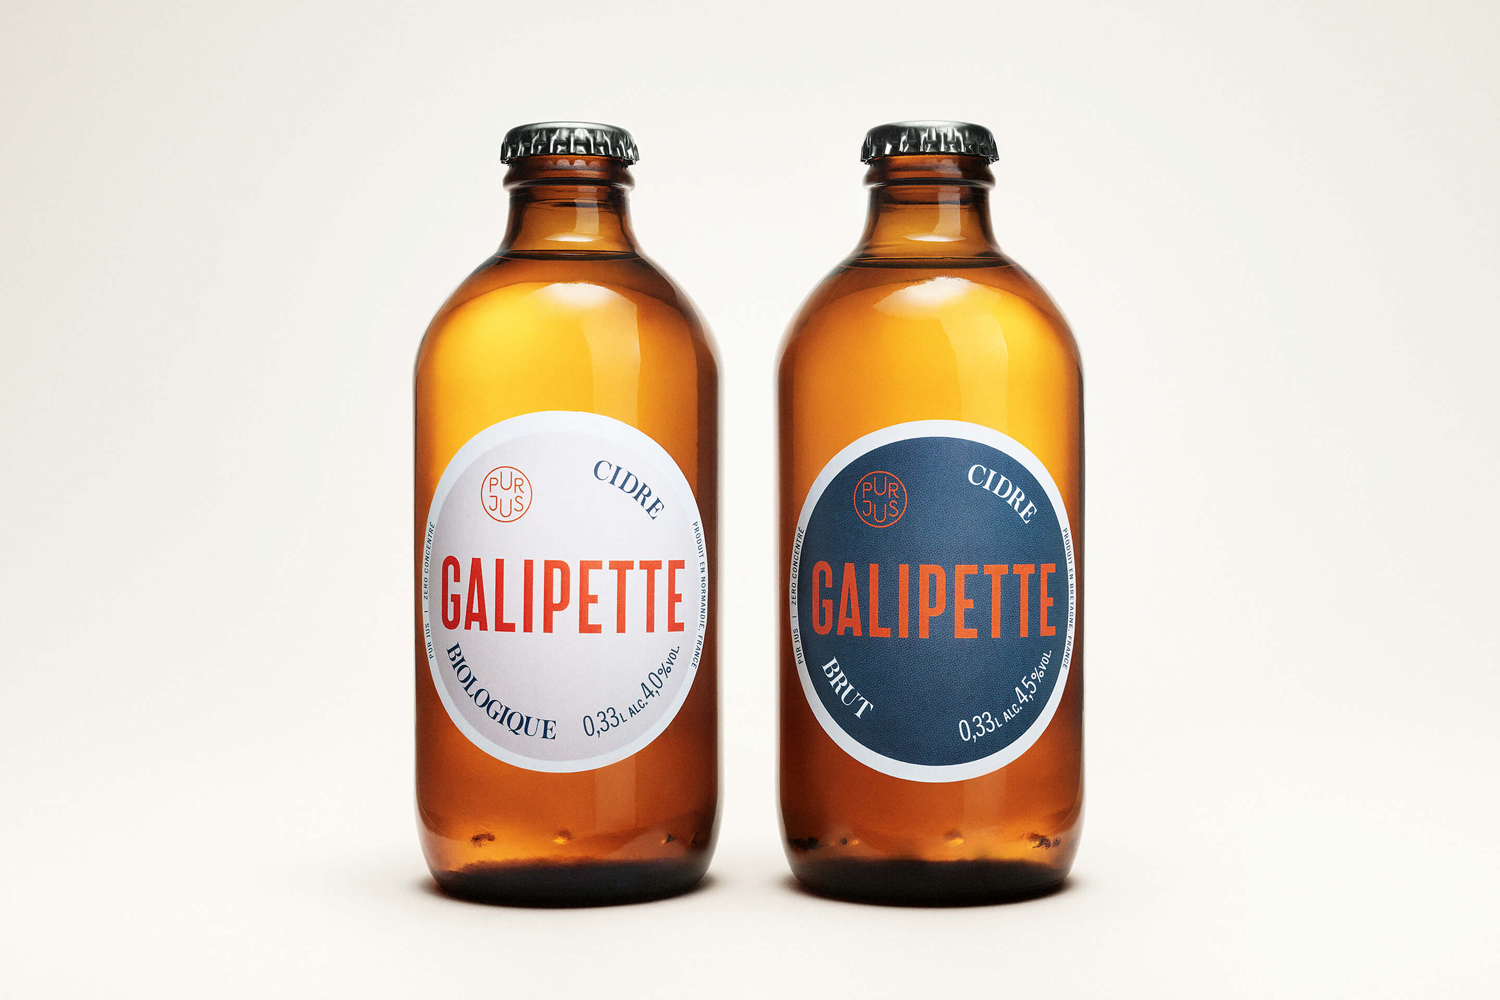 Branding and packaging design for authentic, French premium cidre Galipette Cidre by Werklig, Finland